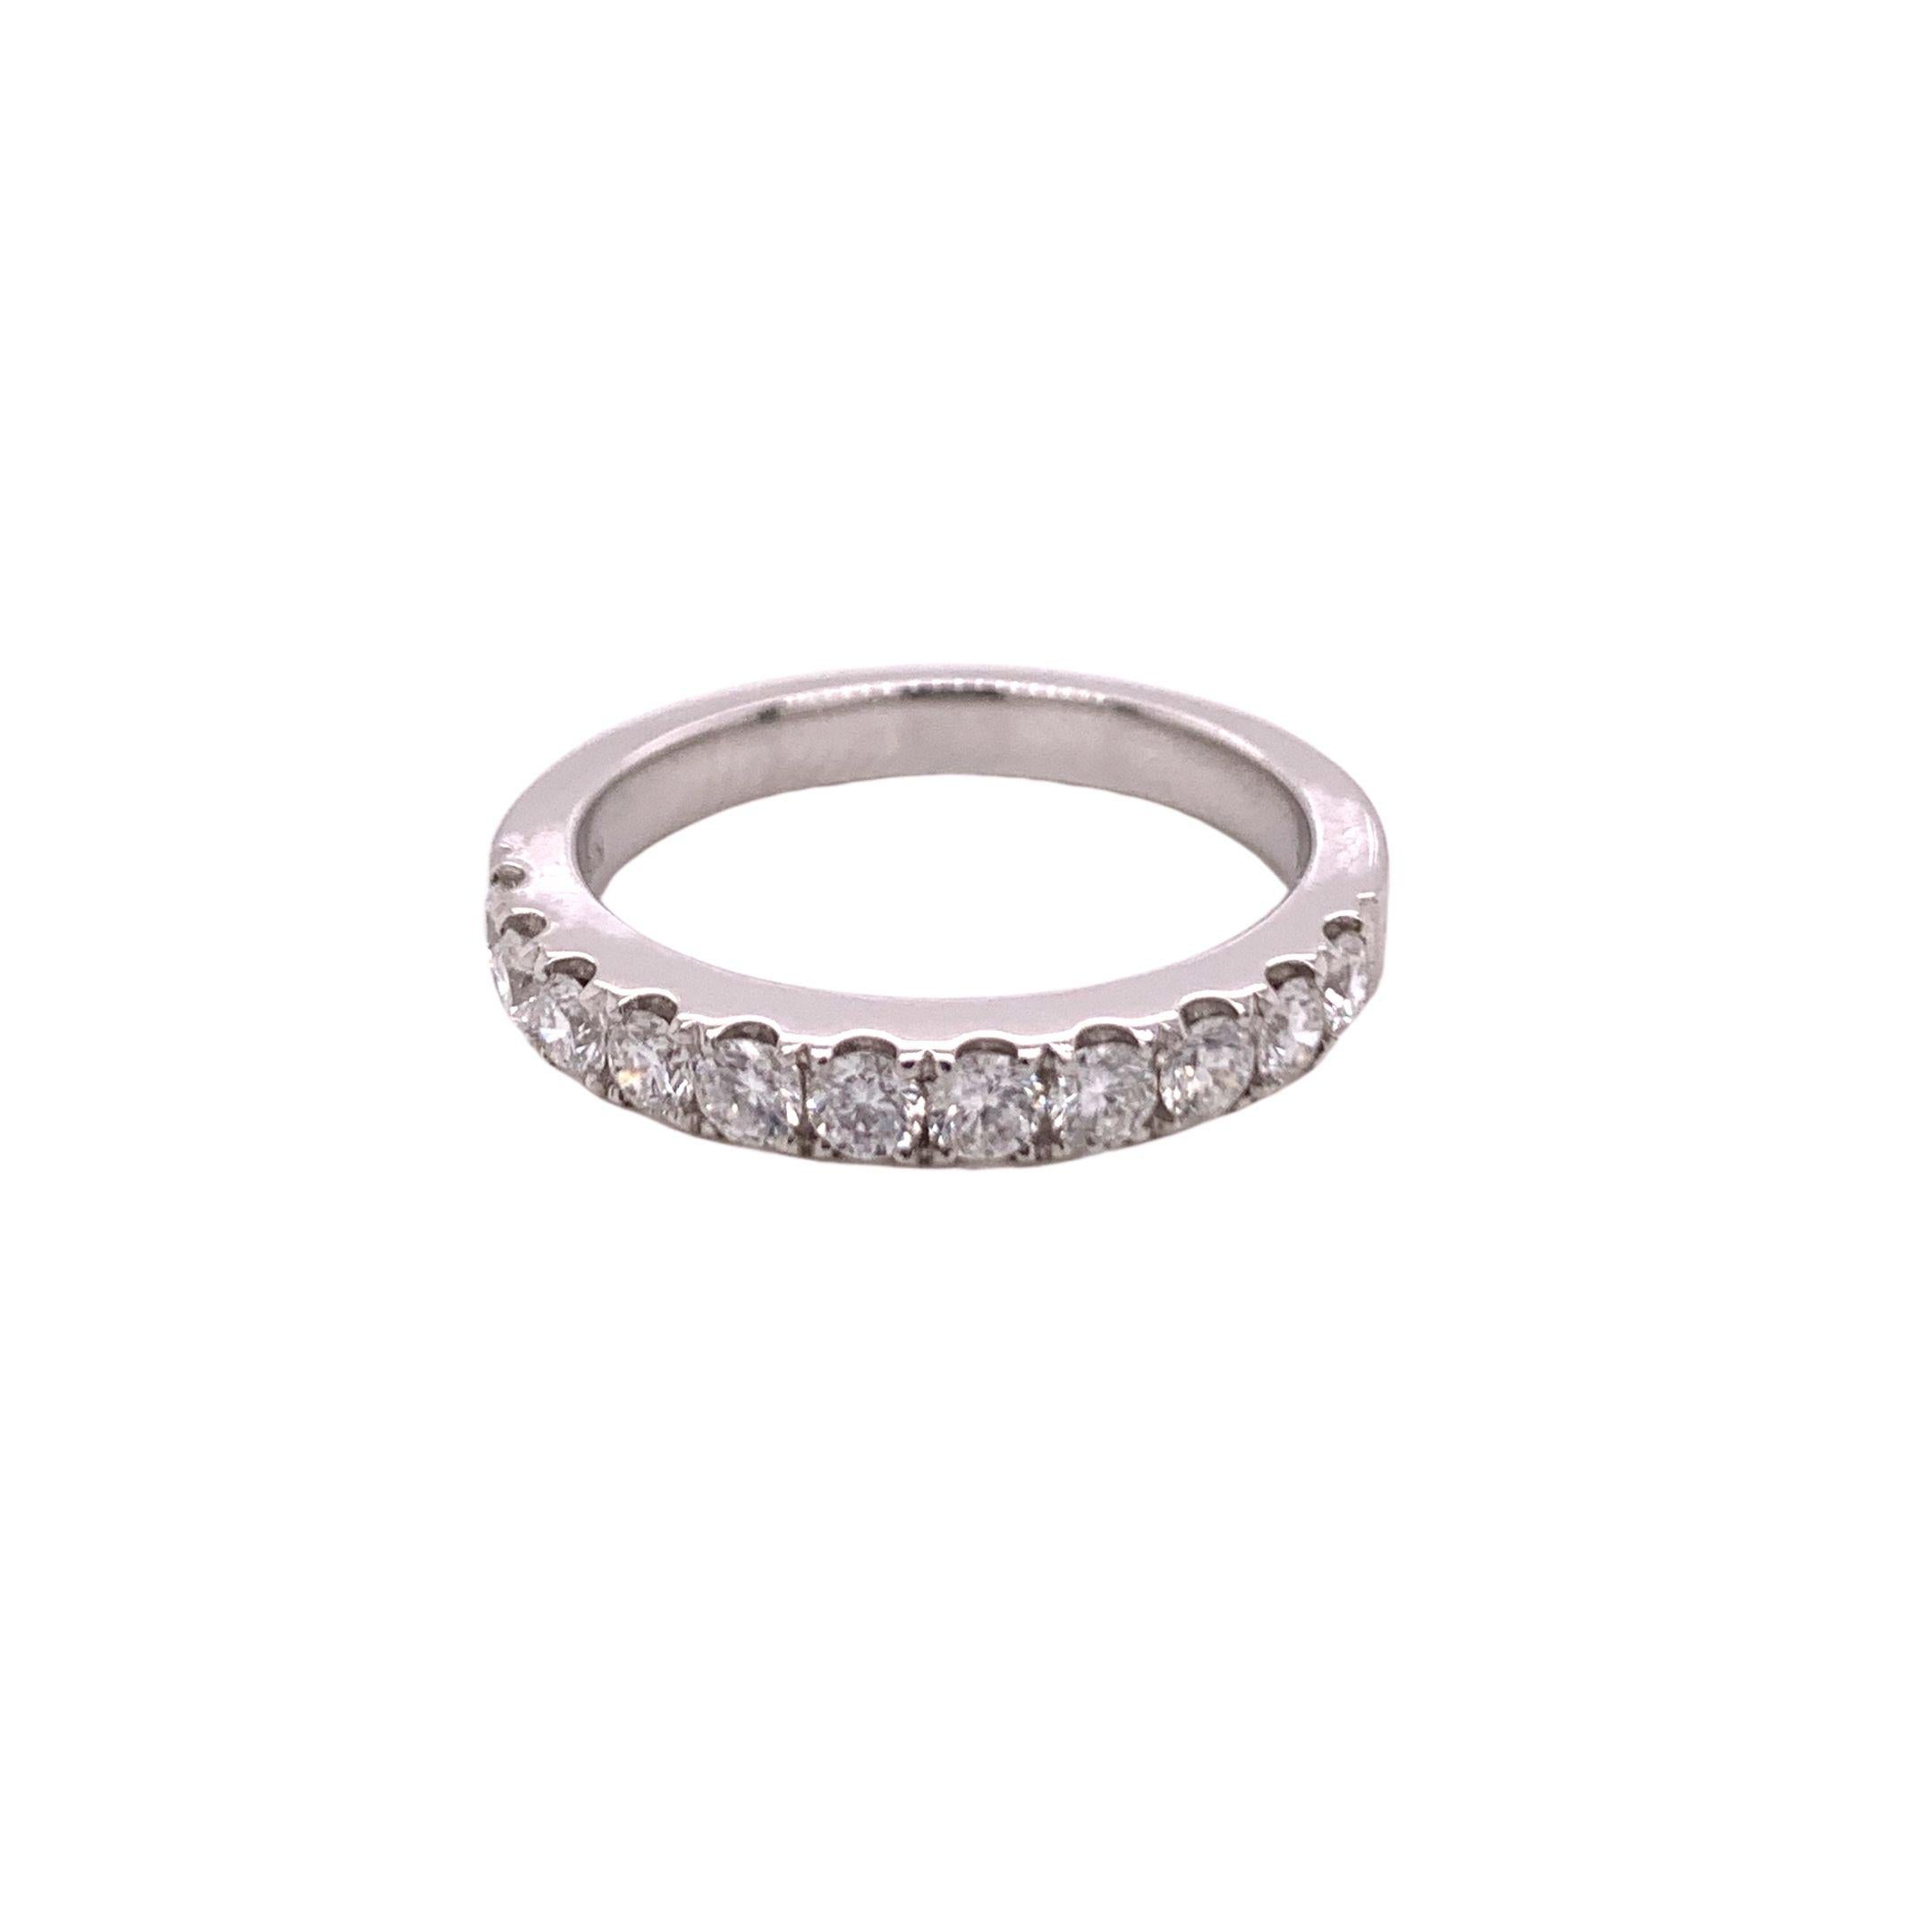 Half Eternity Diamond Ring made with real/natural diamonds. Total Diamond Weight: 0.60 carats. Diamond Quantity: 11 brilliant cut diamonds. Color: G. Clarity: VS. Mounted on 18 karat white gold. Size #6. 